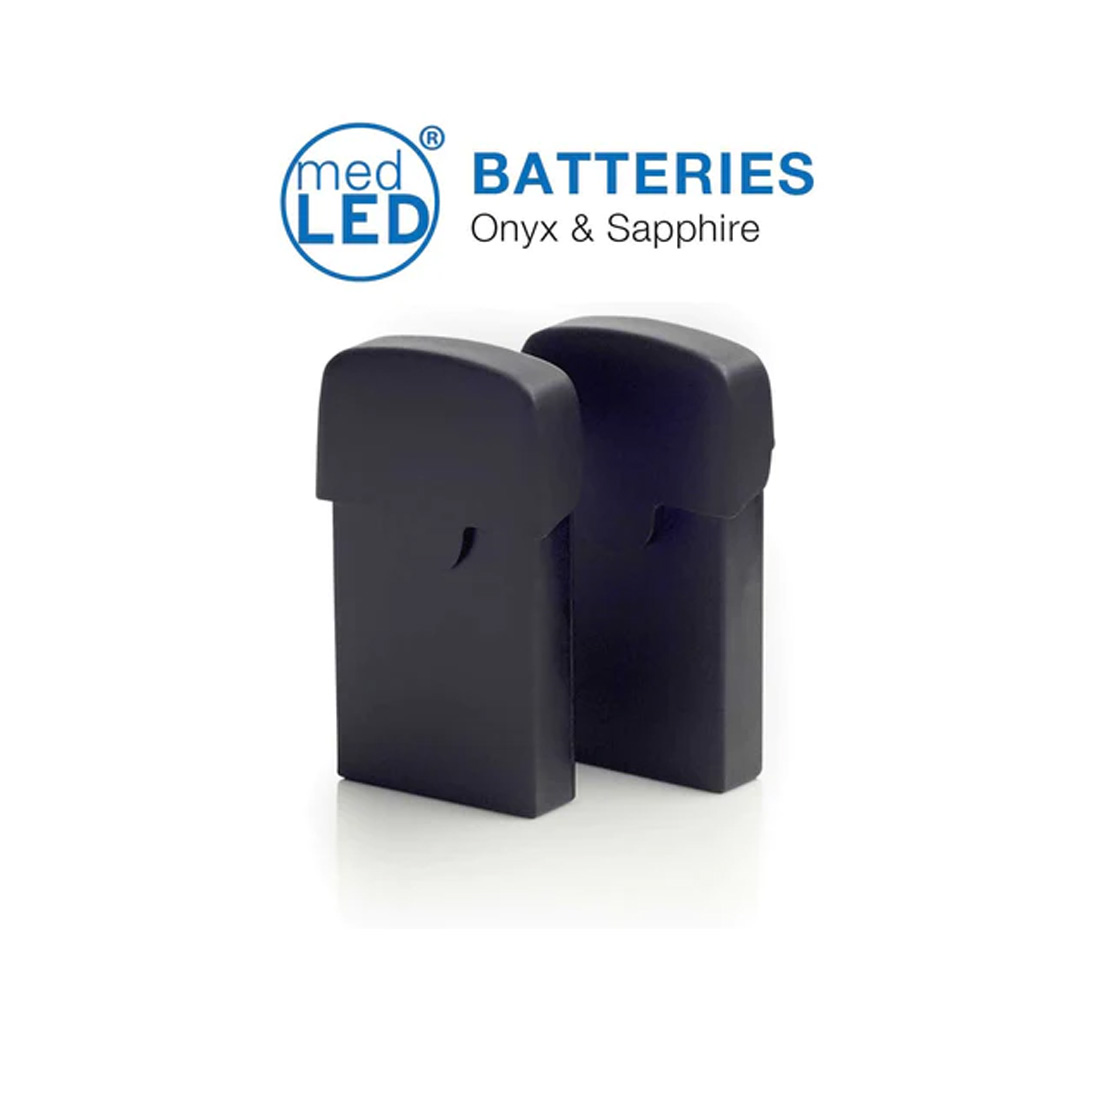 Battery Set for MedLED Onyx & Sapphire (2PC)